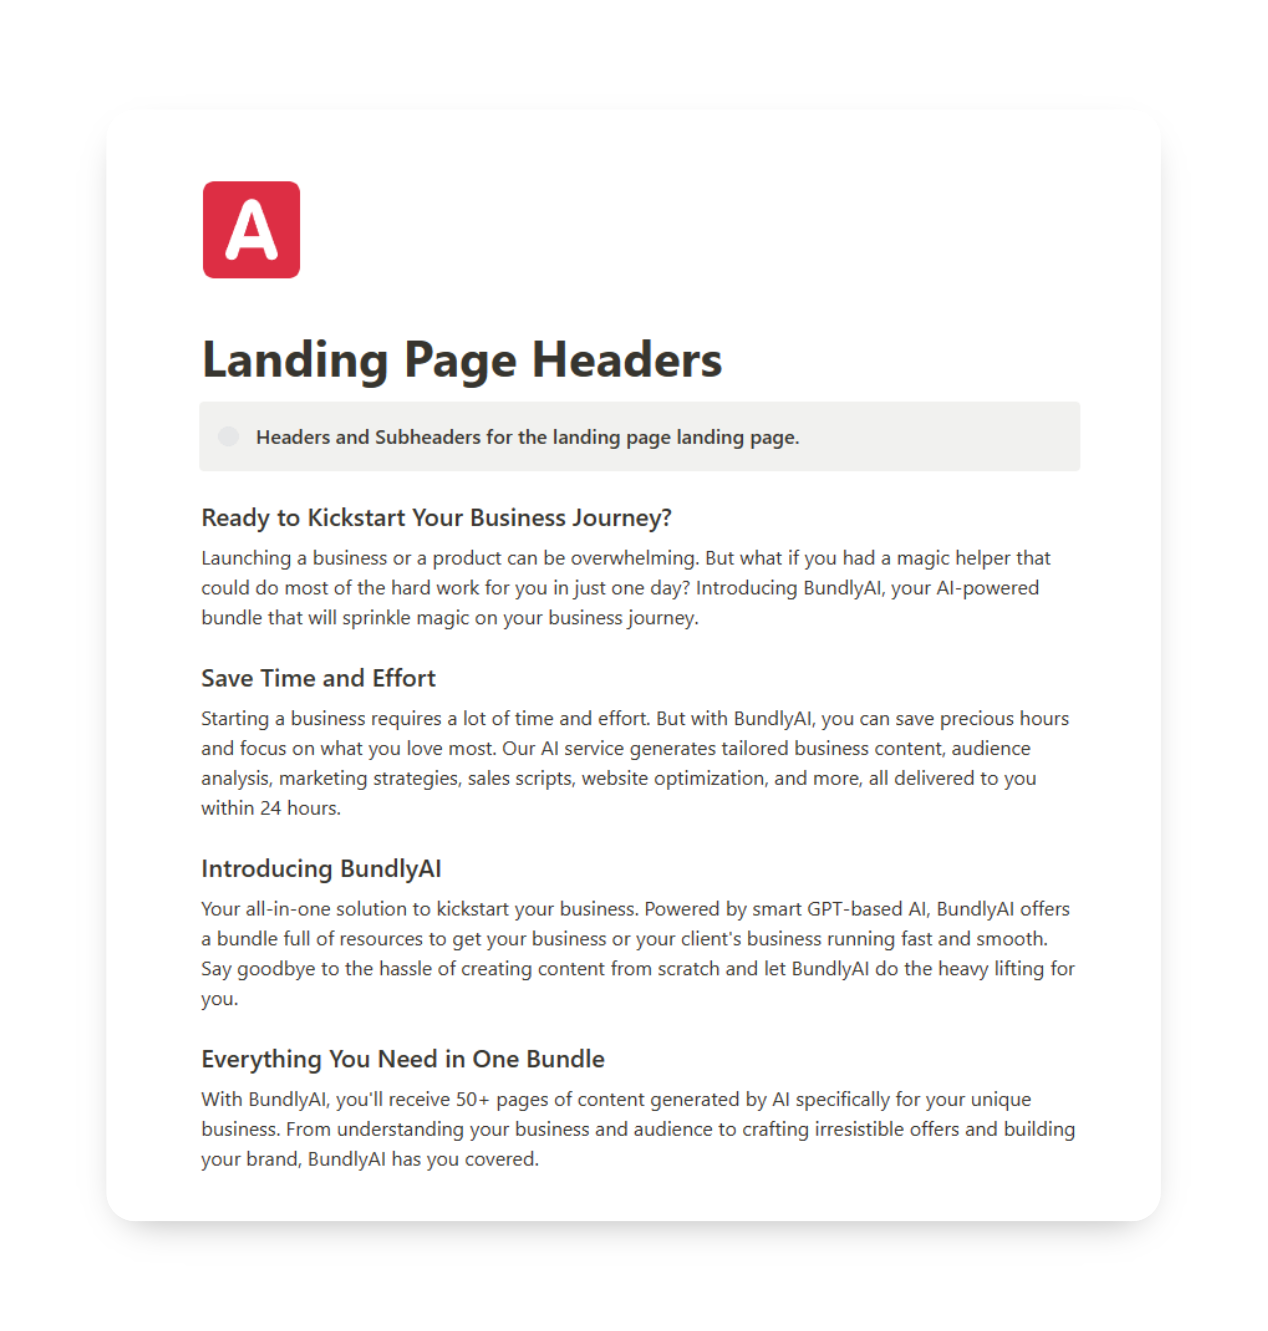 A screenshot of the Landing Page Headings feature on BundlyAI, showcasing 10 distinct sections with engaging content to guide visitors through a captivating story.